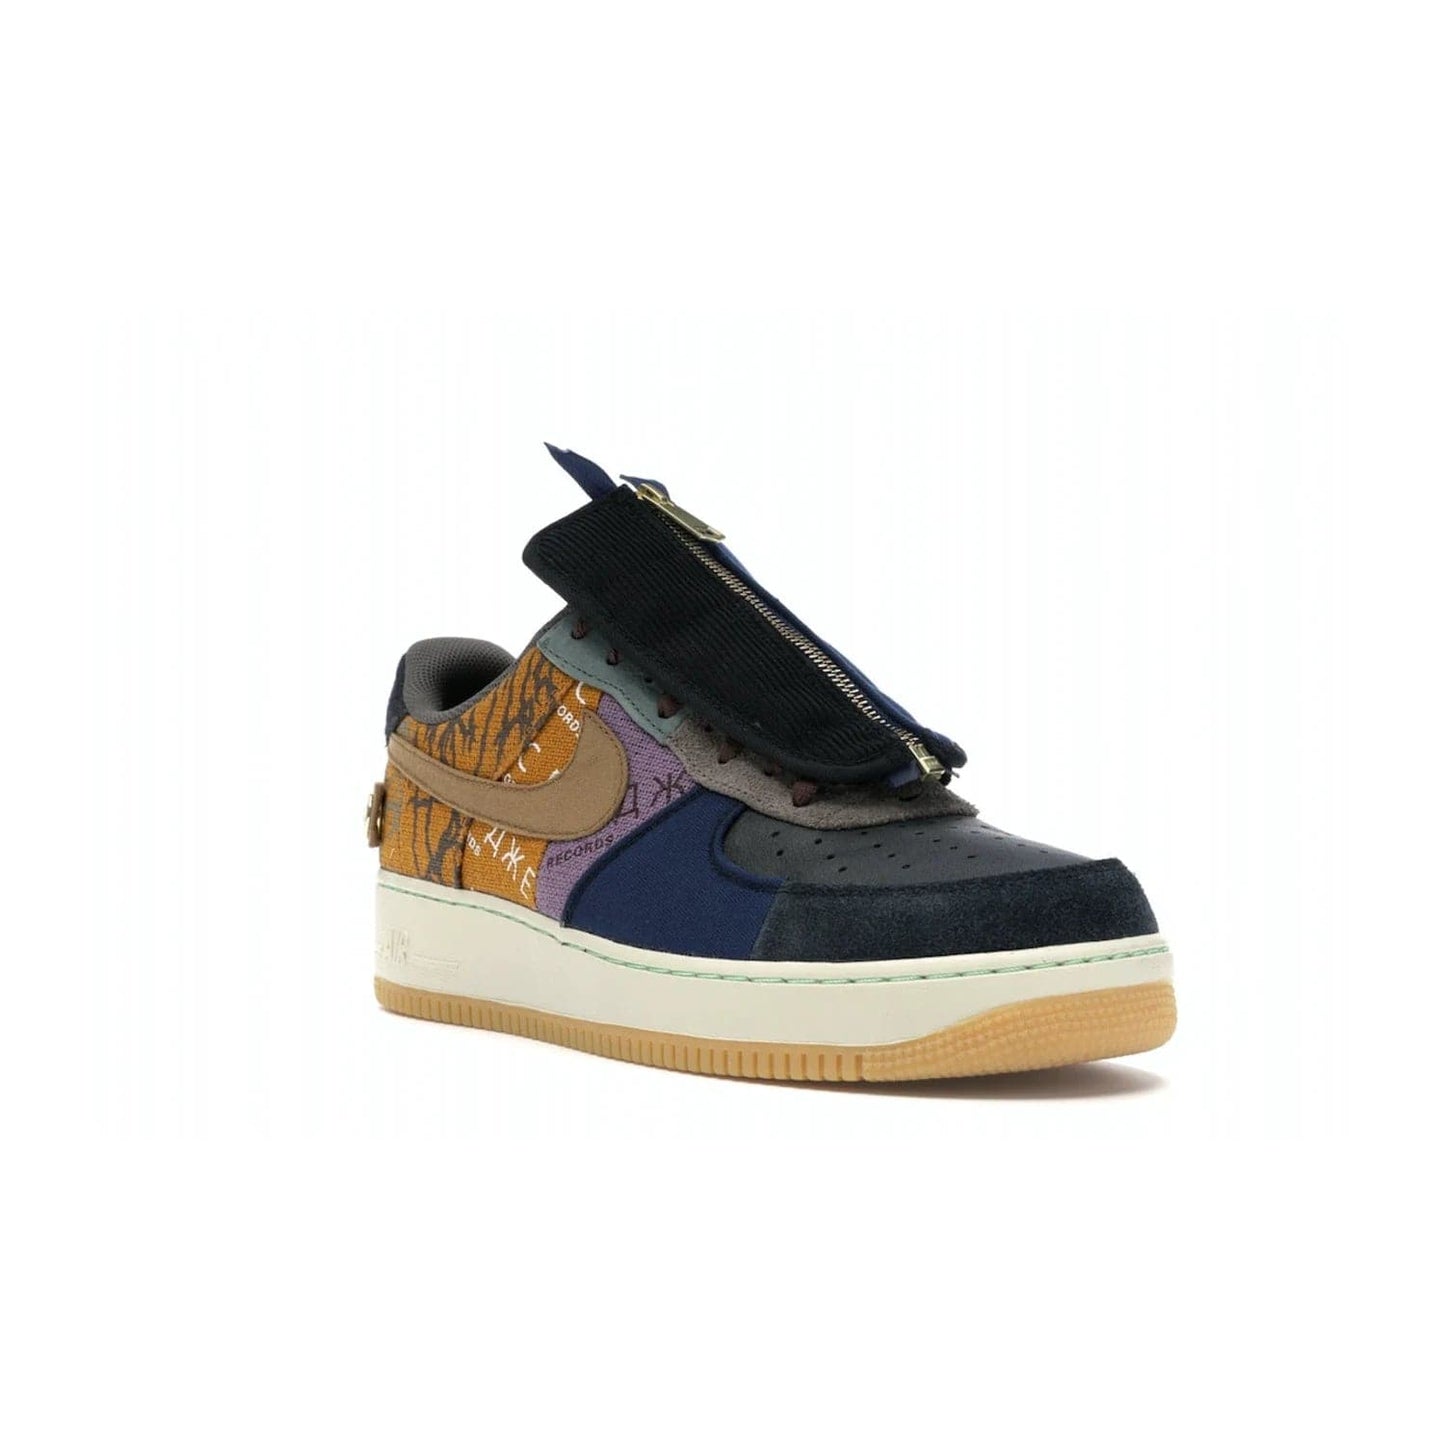 Nike Air Force 1 Low Travis Scott Cactus Jack - Image 6 - Only at www.BallersClubKickz.com - The Nike Air Force 1 Low Travis Scott Cactus Jack features a unique, multi-colored patchwork upper with muted bronze and fossil accents. Includes detachable lace cover, brass zipper, and Cactus Jack insignias. A sail midsole, gum rubber outsole complete the eye-catching design. Perfect for comfort and style with unexpected touches of detail.